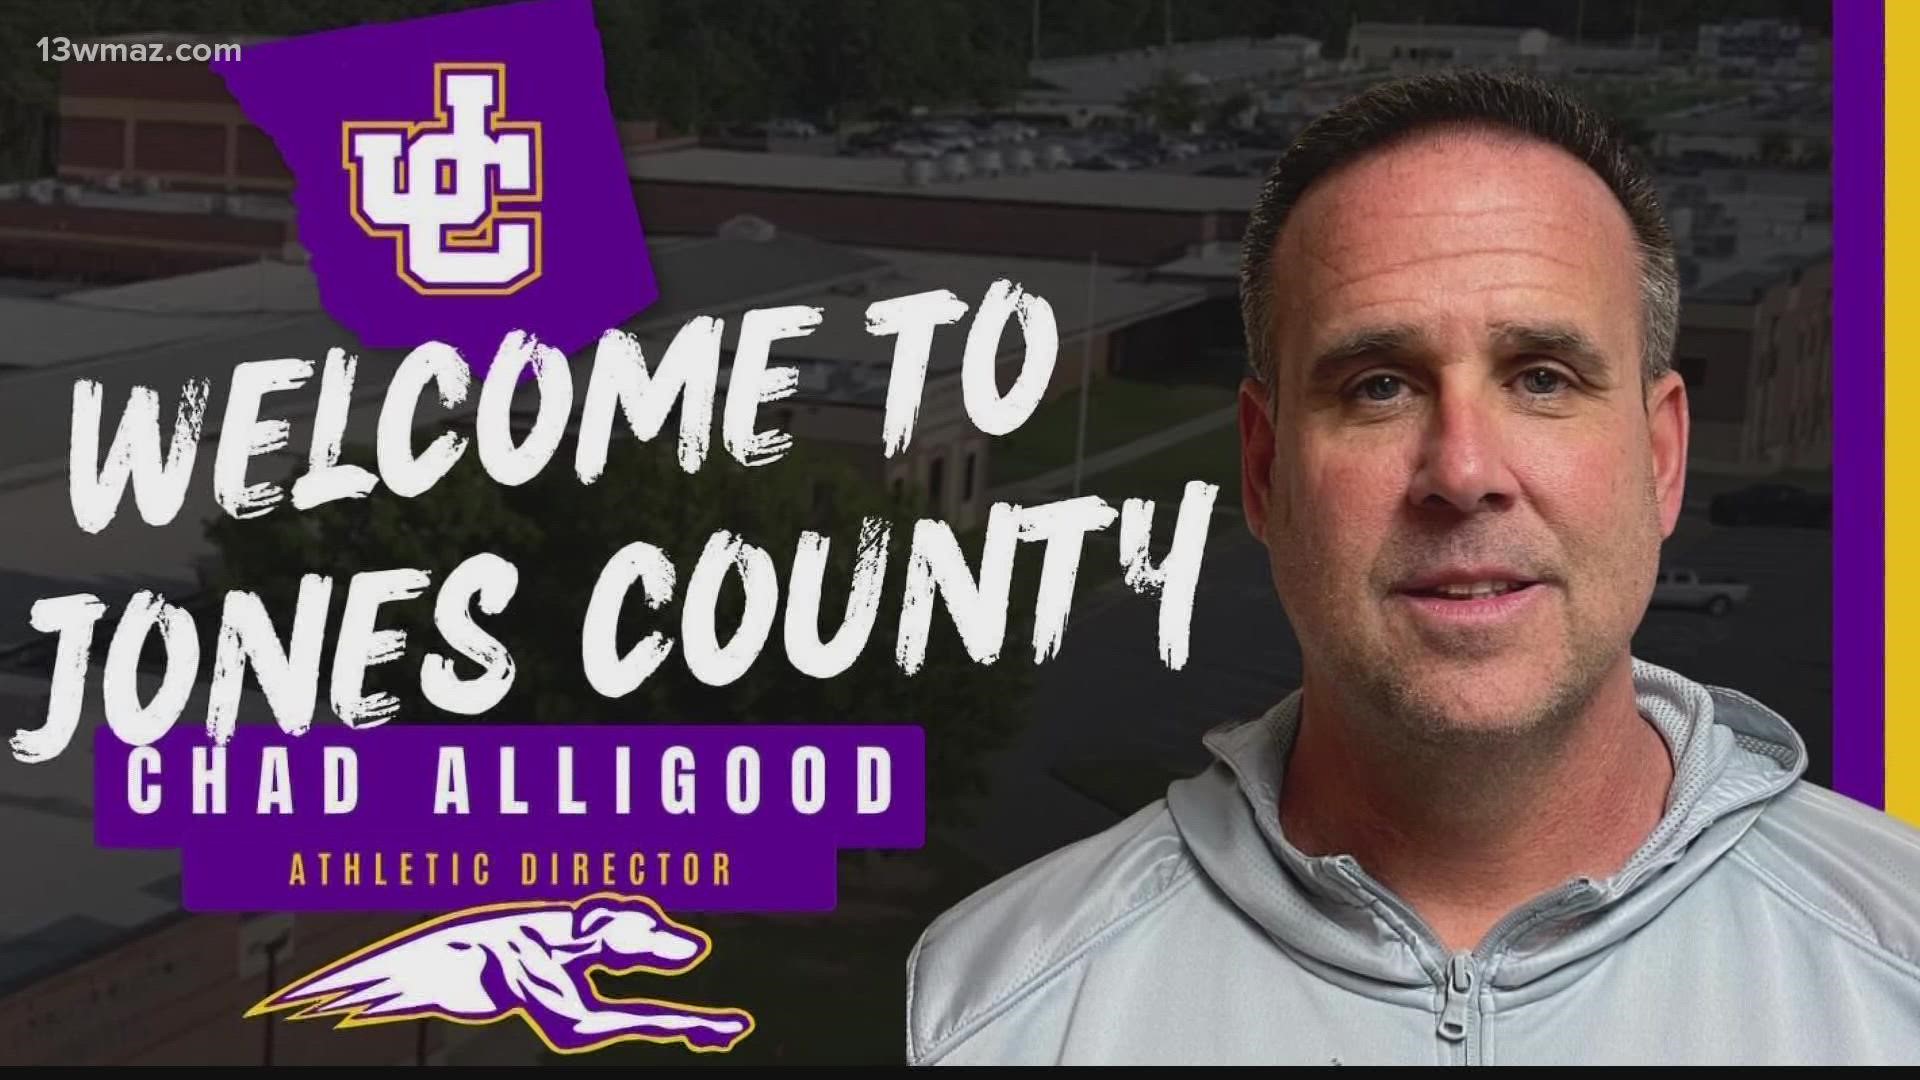 Jones County School System announced that Alligood would fill their vacancy of countywide athletic director, just one day after he resigned from Northside